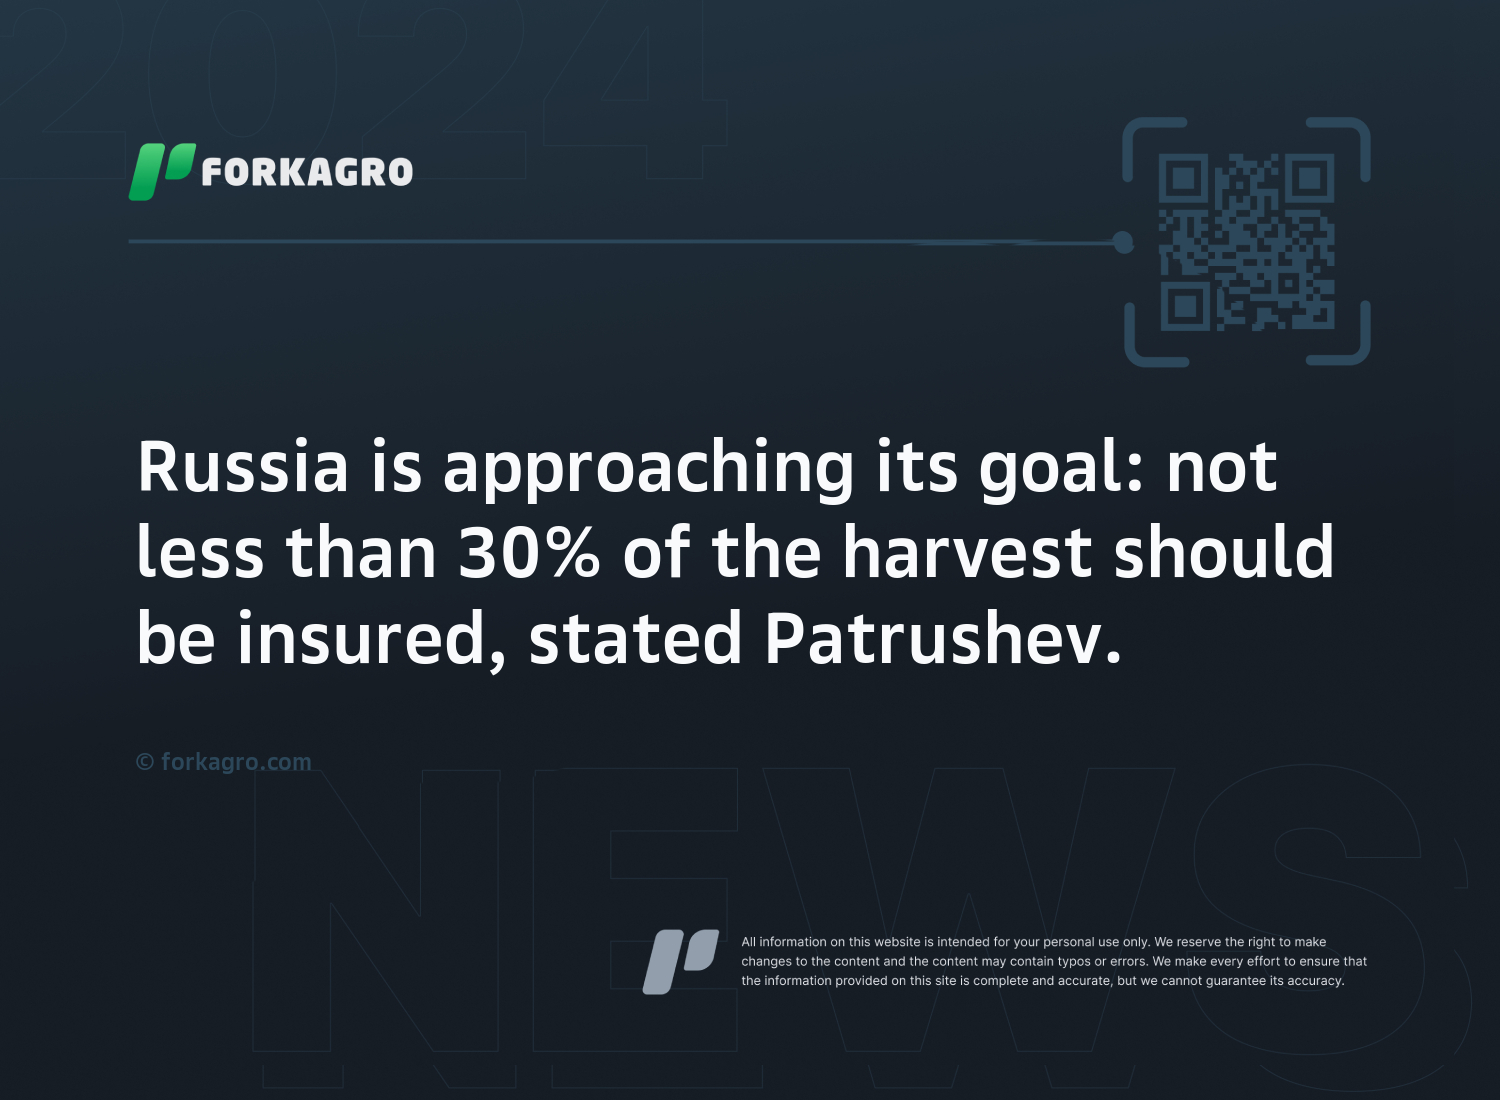 Russia is approaching its goal: not less than 30% of the harvest should be insured, stated Patrushev.